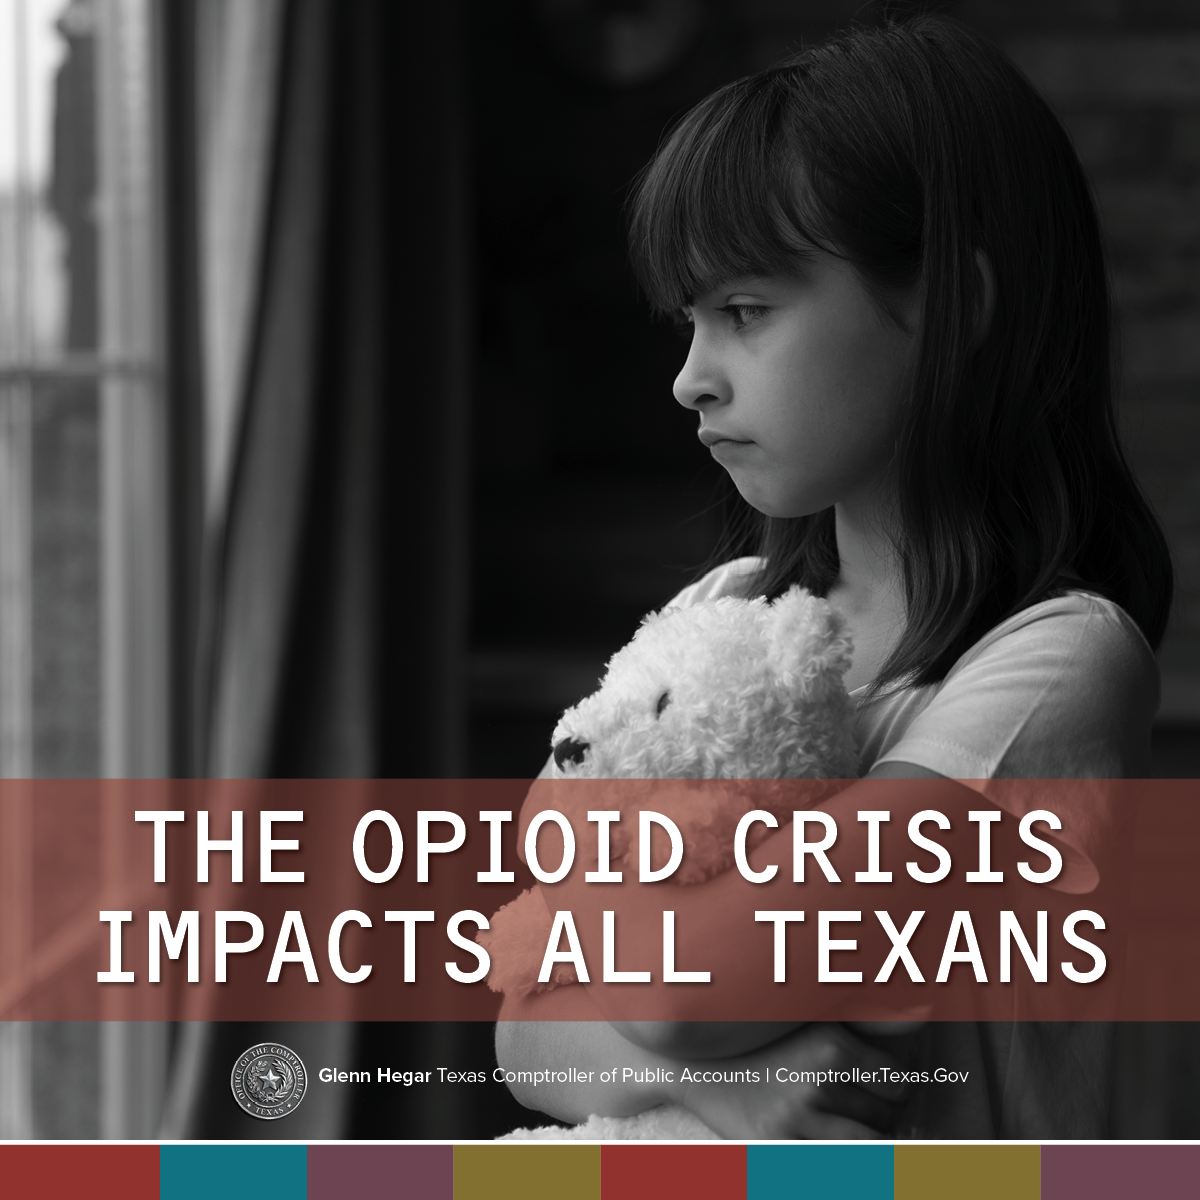 The Opioid Crisis Impacts All Texans